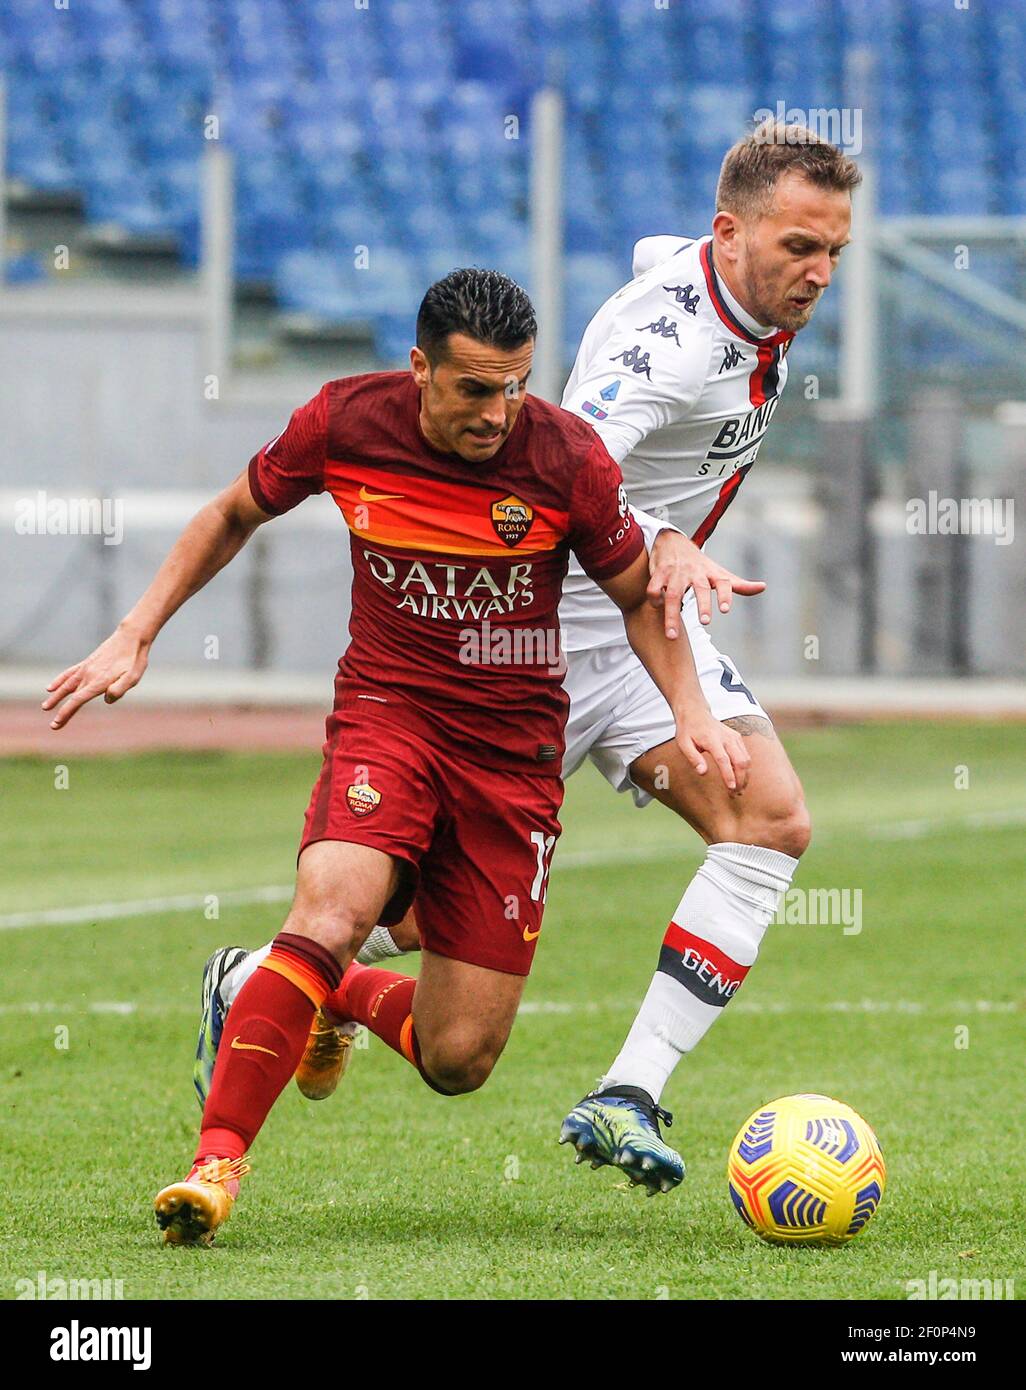 Rome, Italy. 07th Mar, 2021. Roma's Pedro, left, is challenged by Genoa's  Domenico Criscito during the Italian Serie A Football match between Roma  and Genoa at the Olympic stadium. Credit: Riccardo De